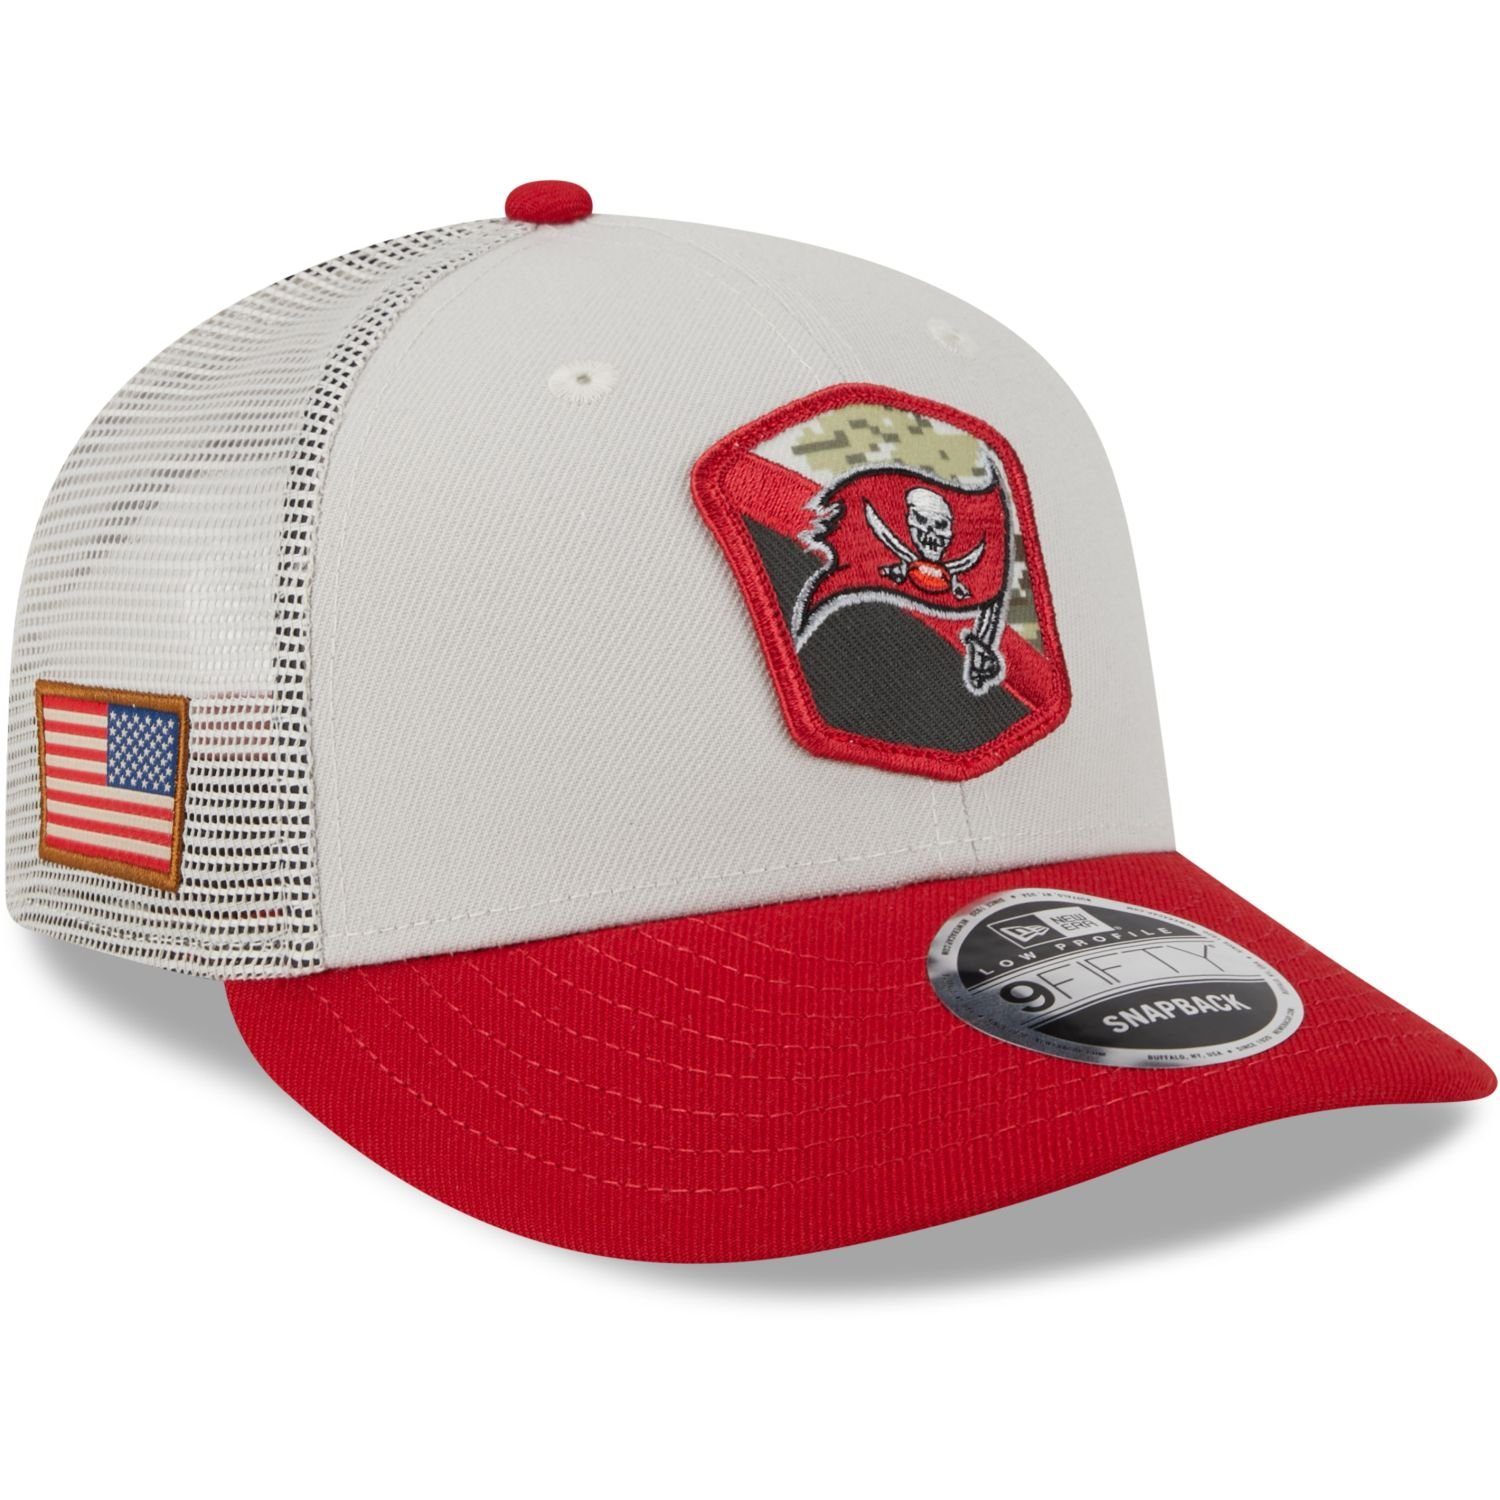 New Era Snapback Cap 9Fifty Low Profile Snap NFL Salute to Service Tampa Bay Buccaneers